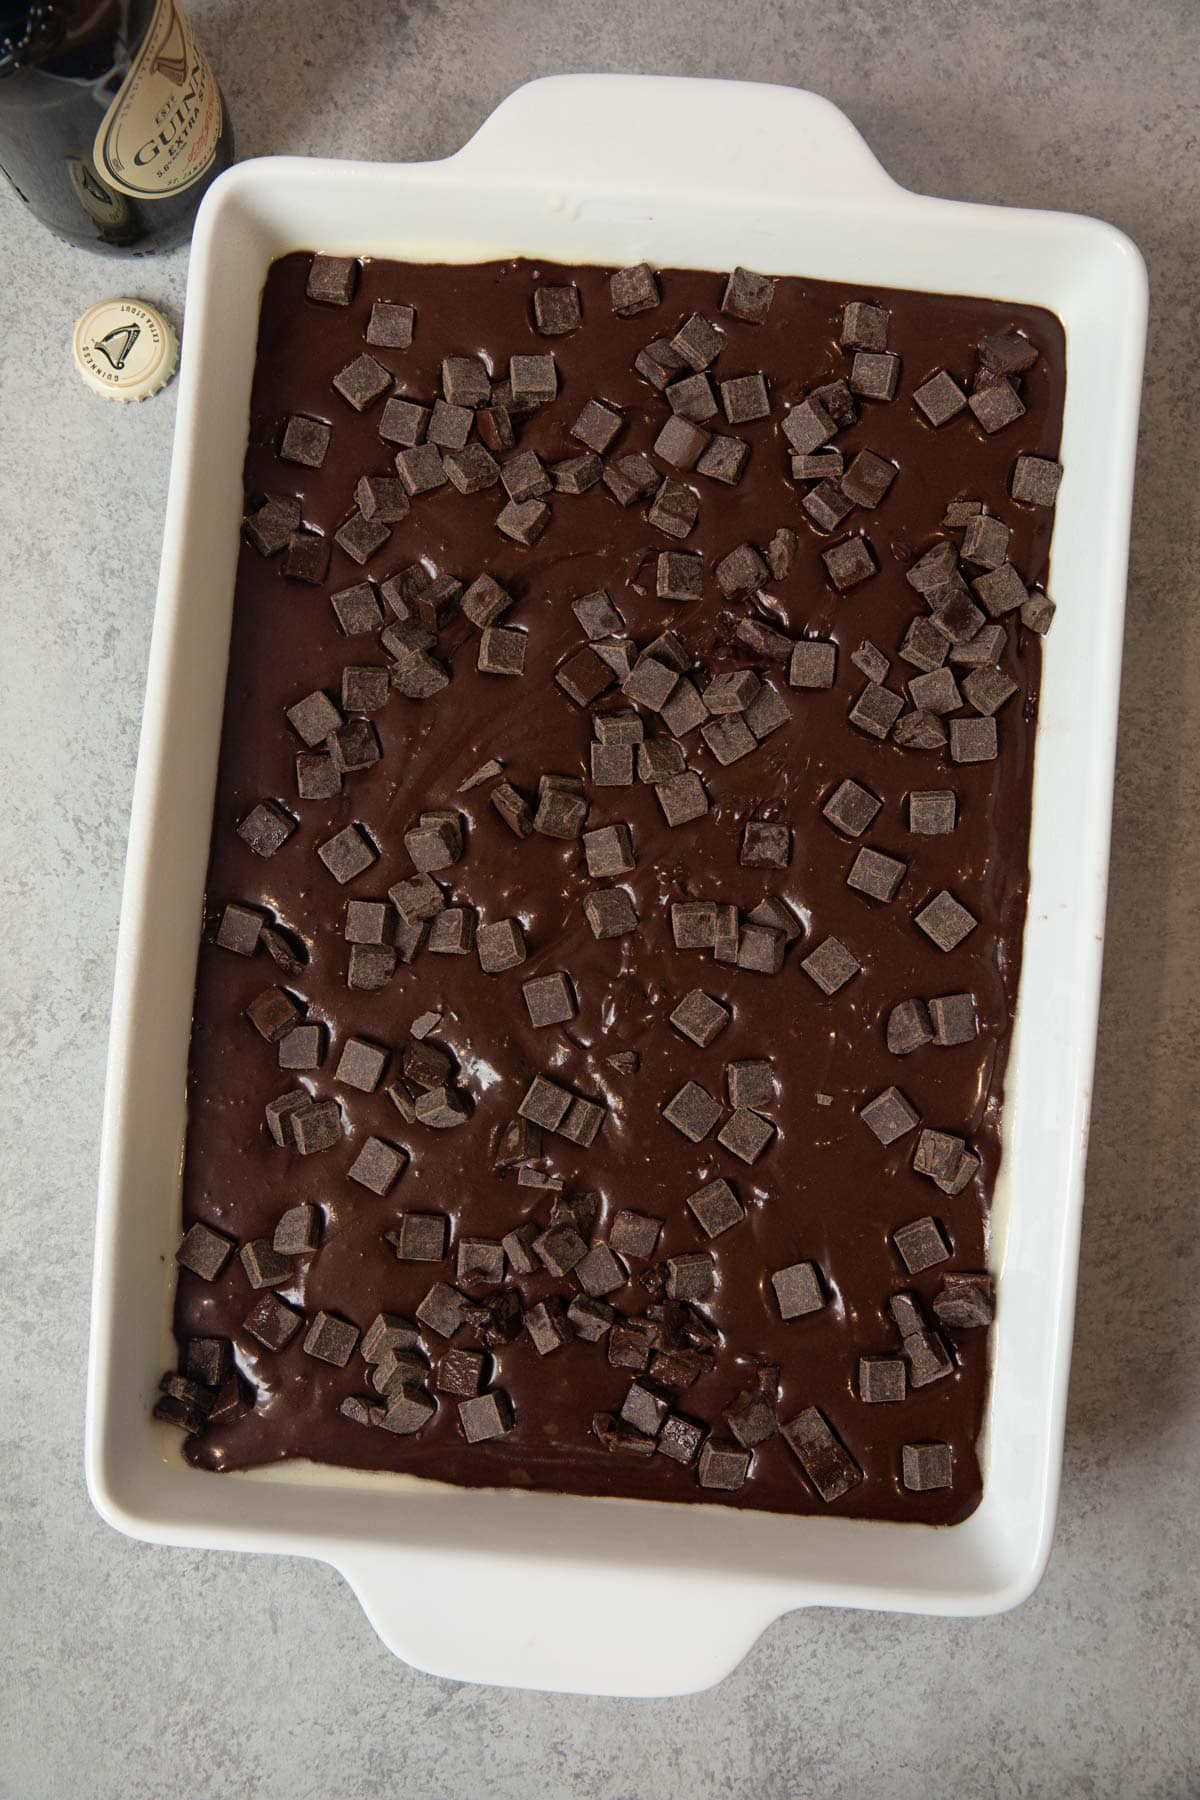 Guinness Brownies in baking dish before baking